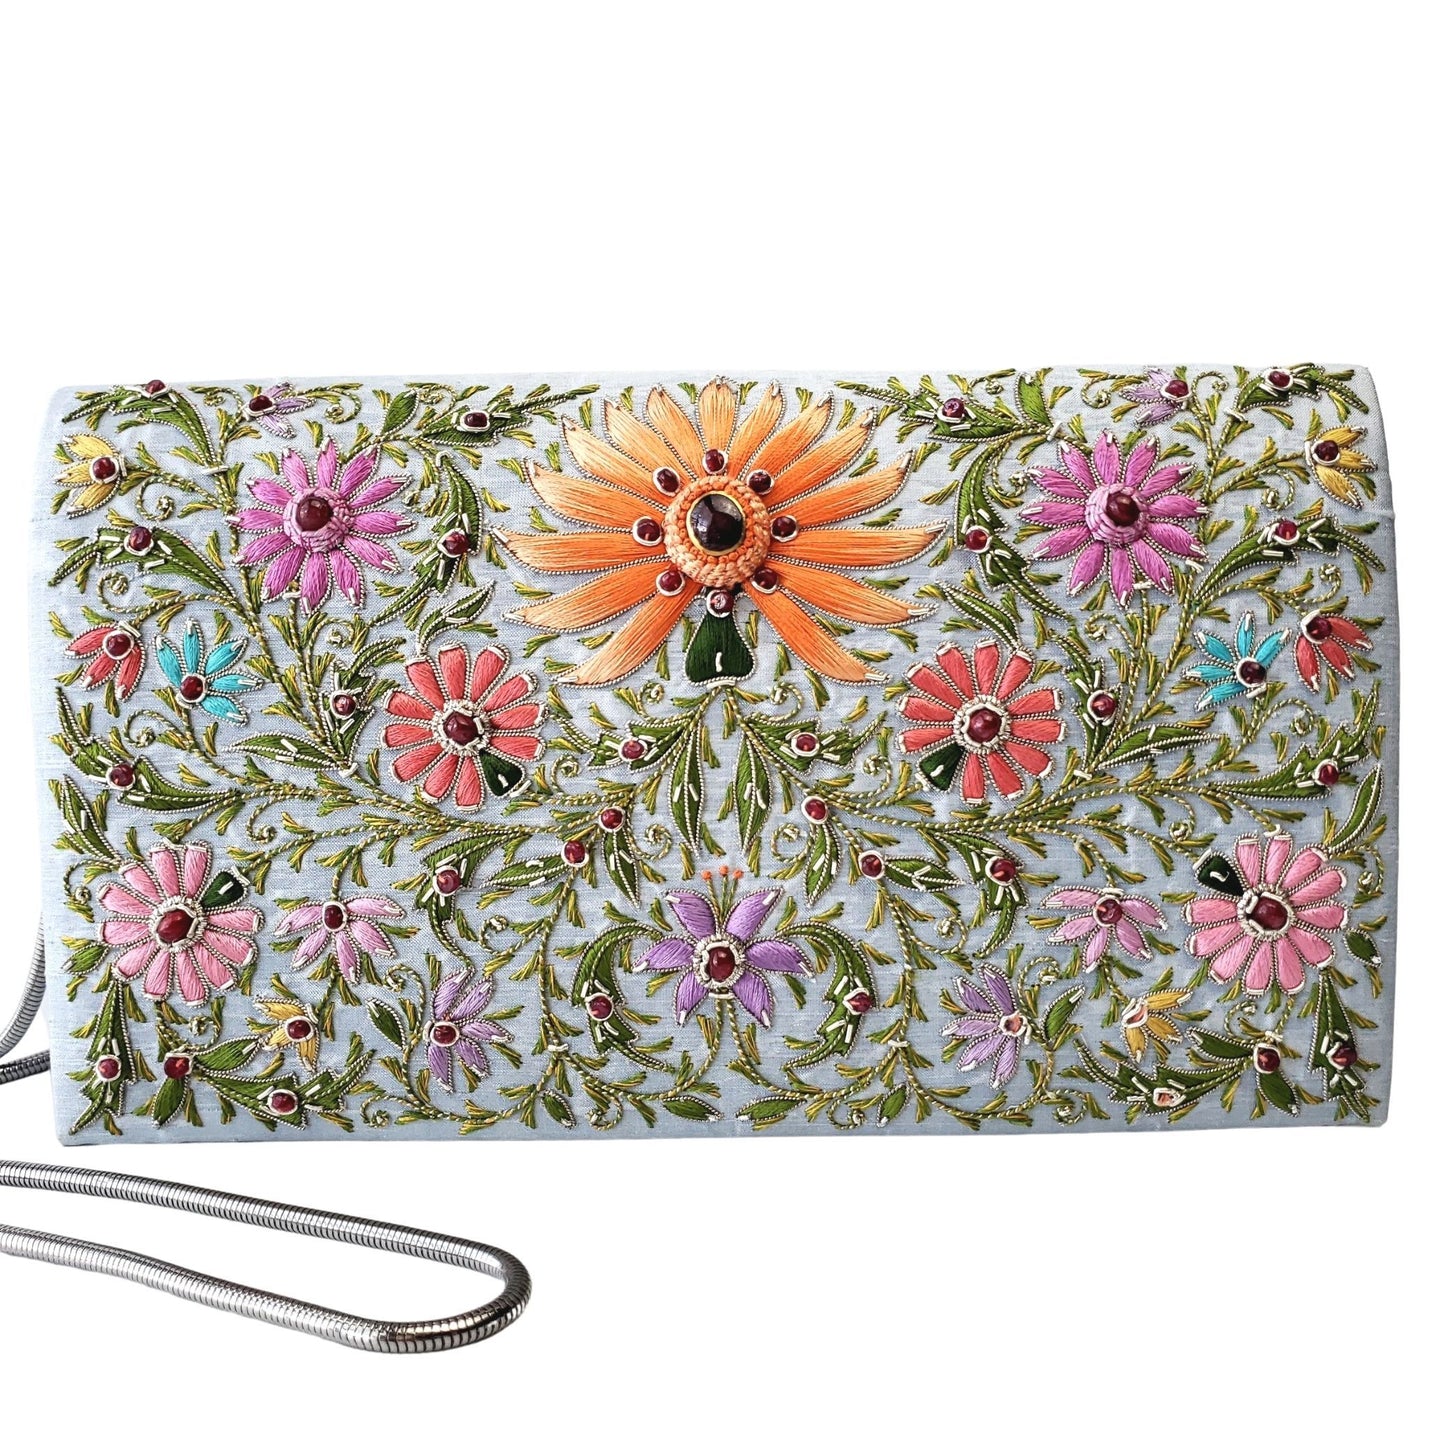 Multicolor floral embroidered silk handbag with rubies BoutiqueByMariam.